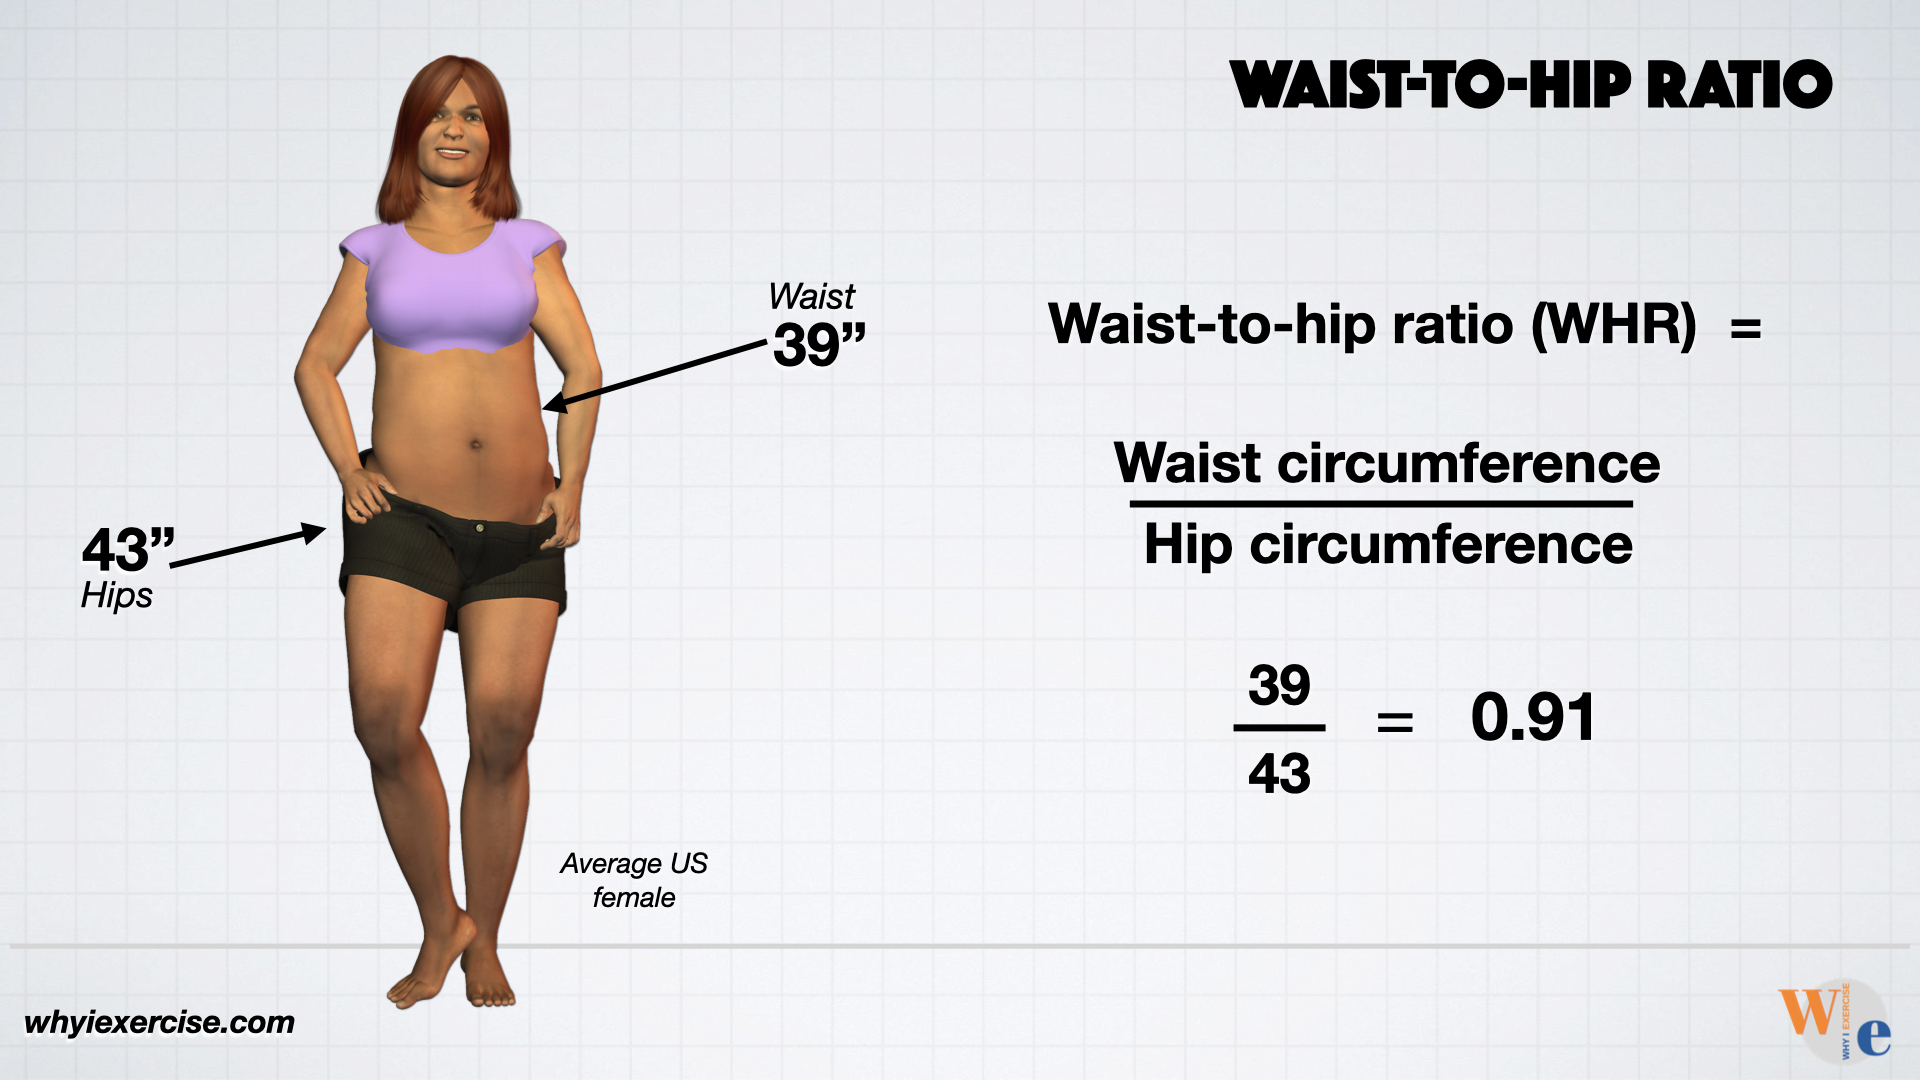 Is a 29 inch waist with a 40 inch butt and bust fat?